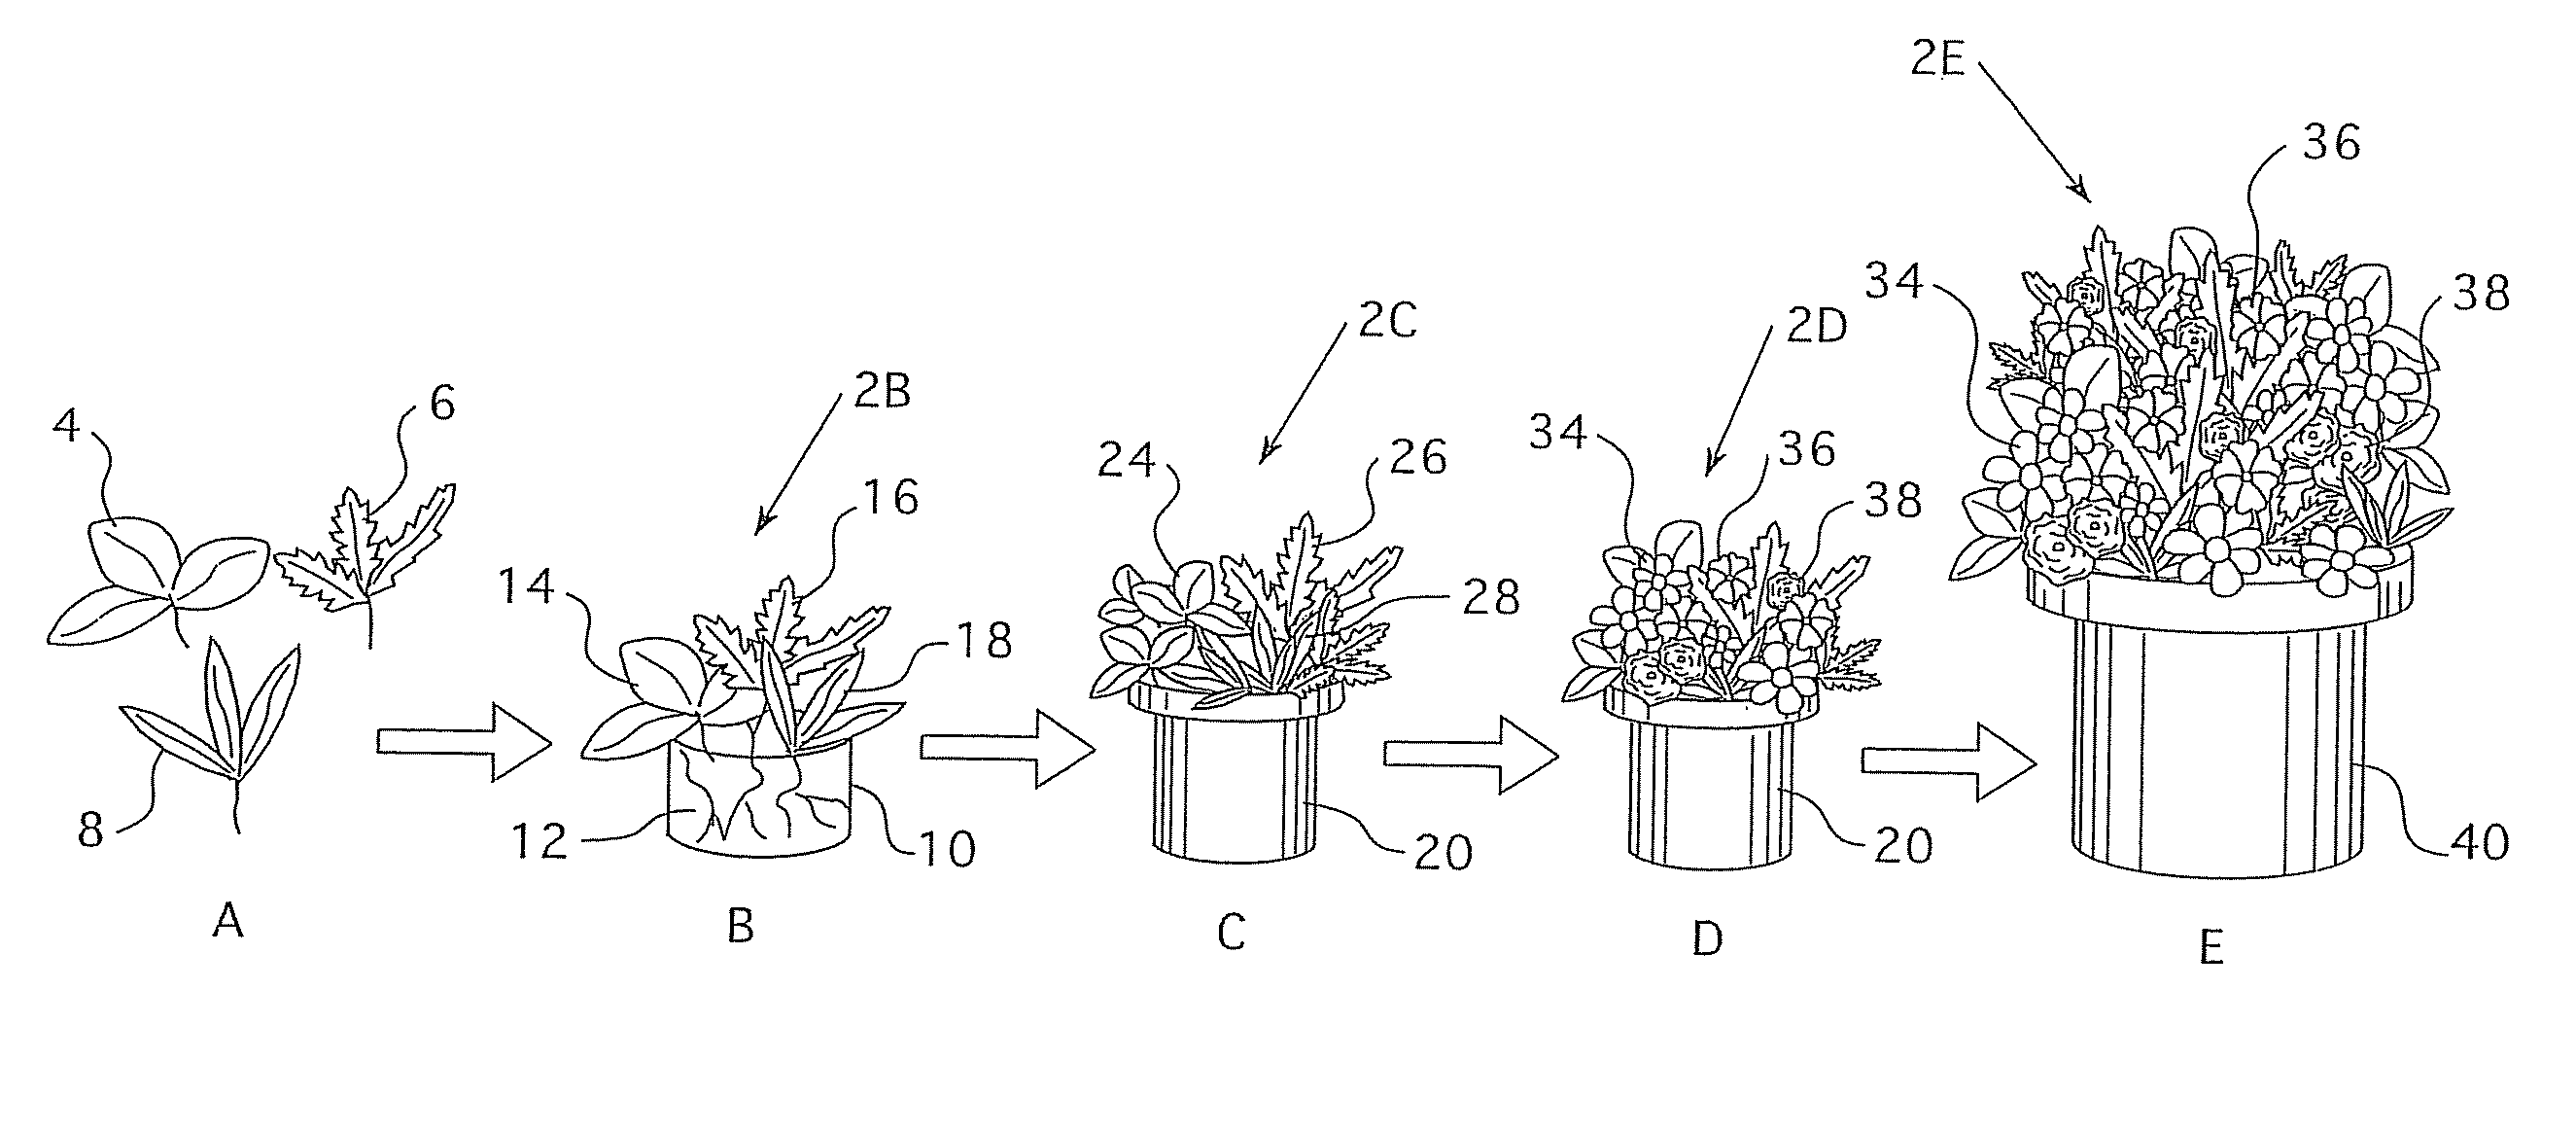 Method of producing a horticultural display